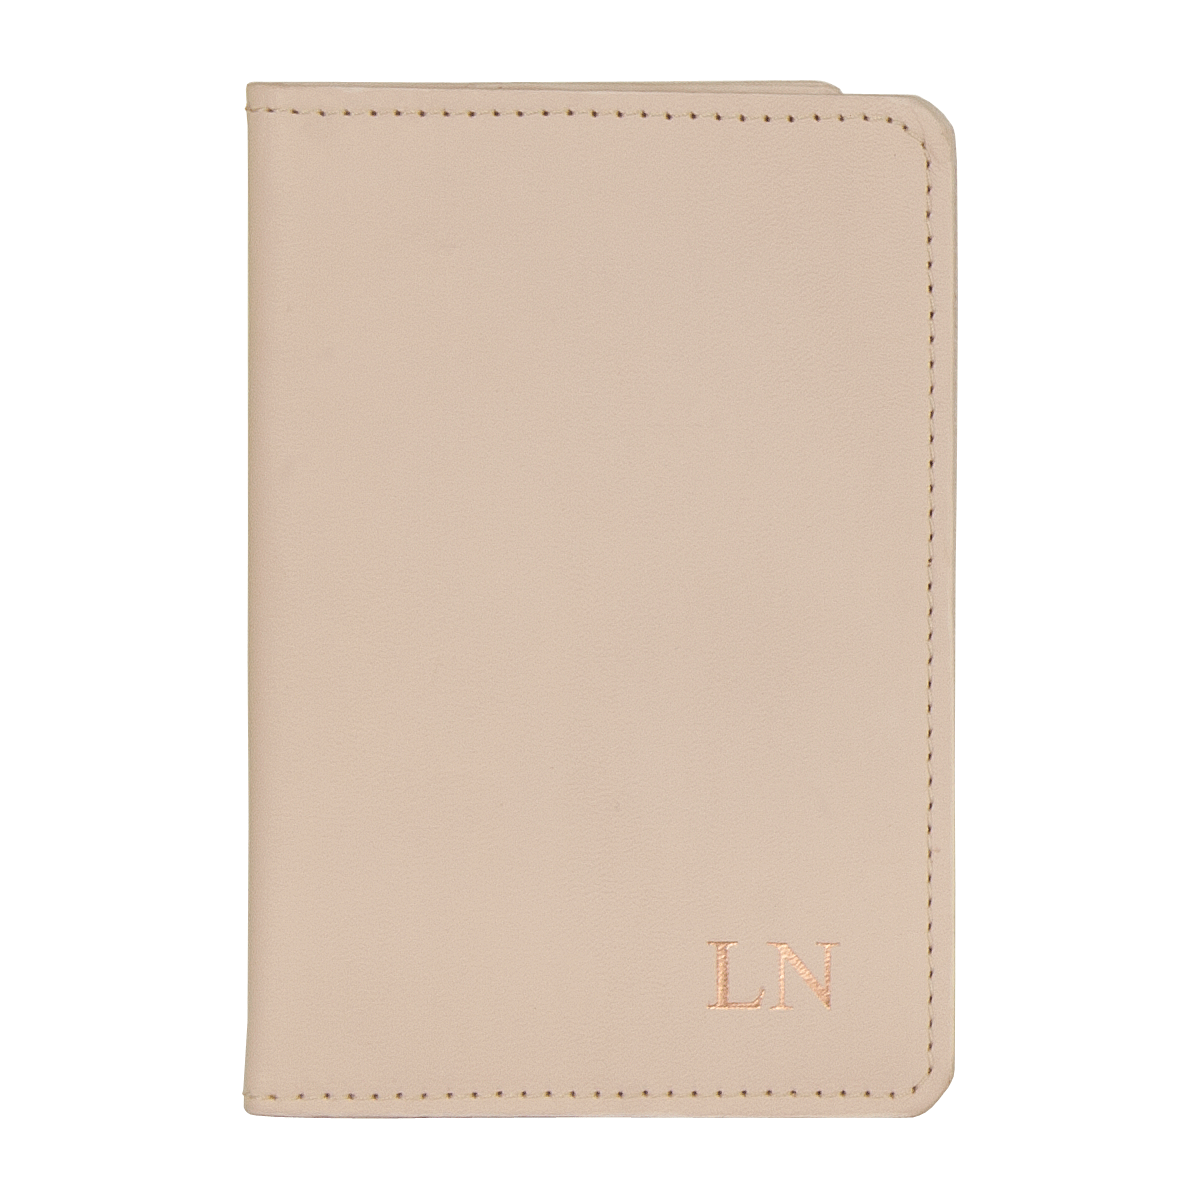 Leather Passport Holder Champagne, Part of the Luxury Leather Travel Set